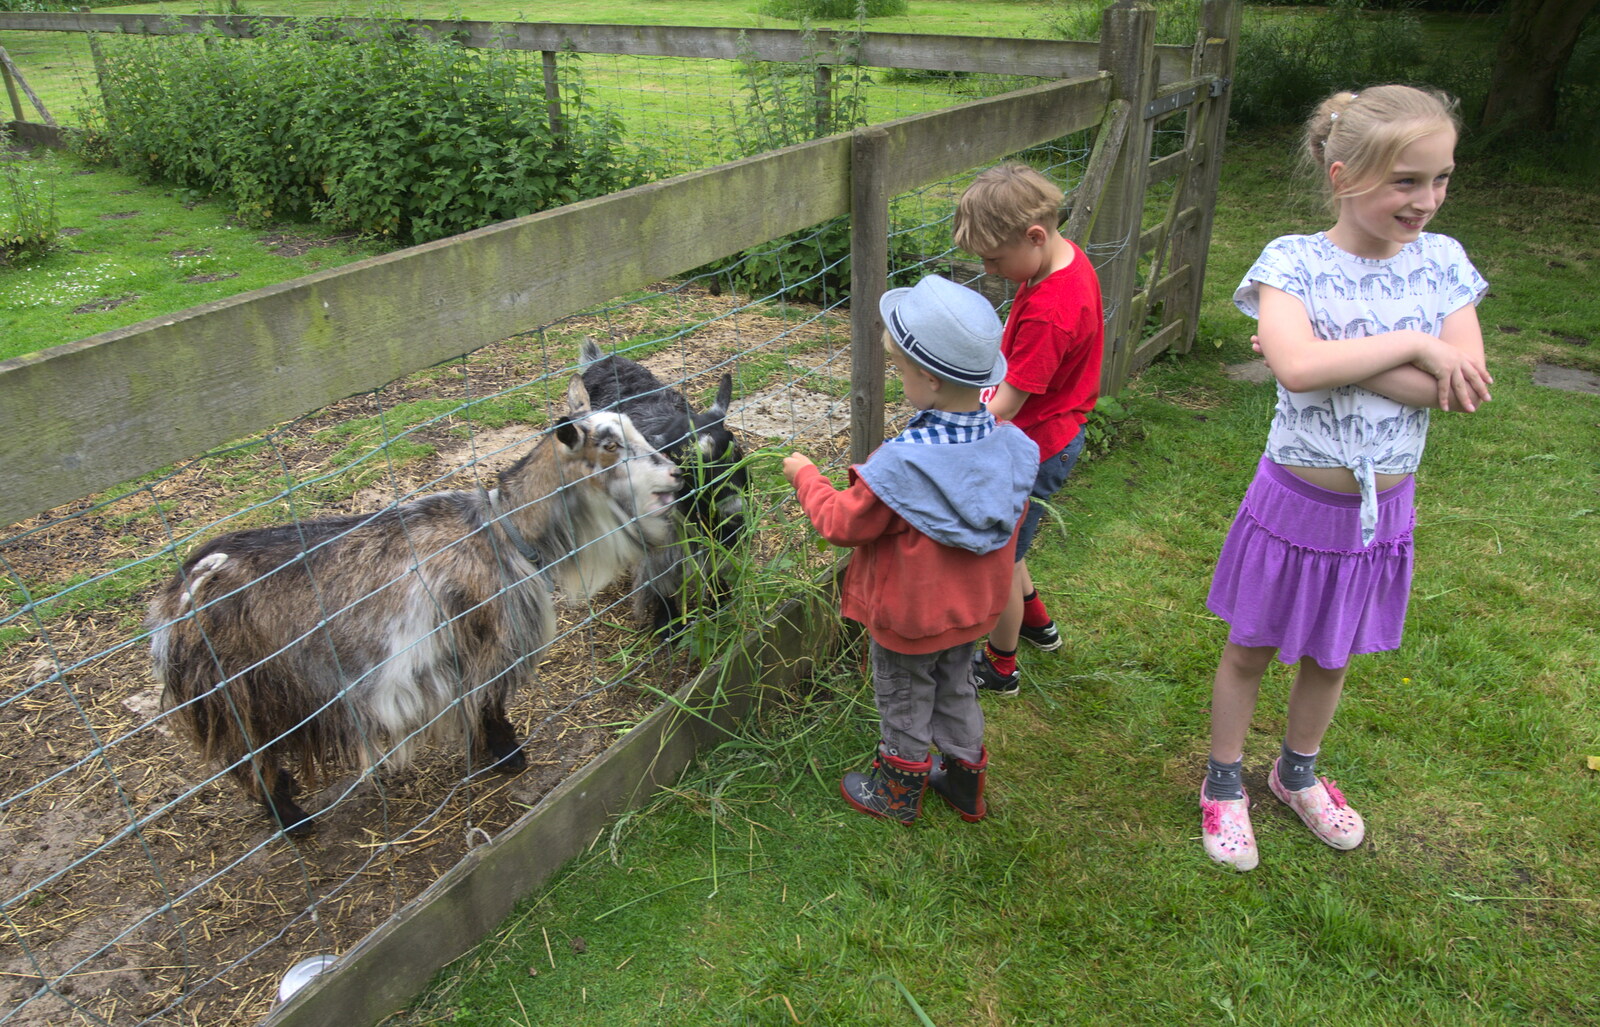 Harry feeds the goats from The Queen's Village Hall Birthday, Brome, Suffolk - 12th June 2016